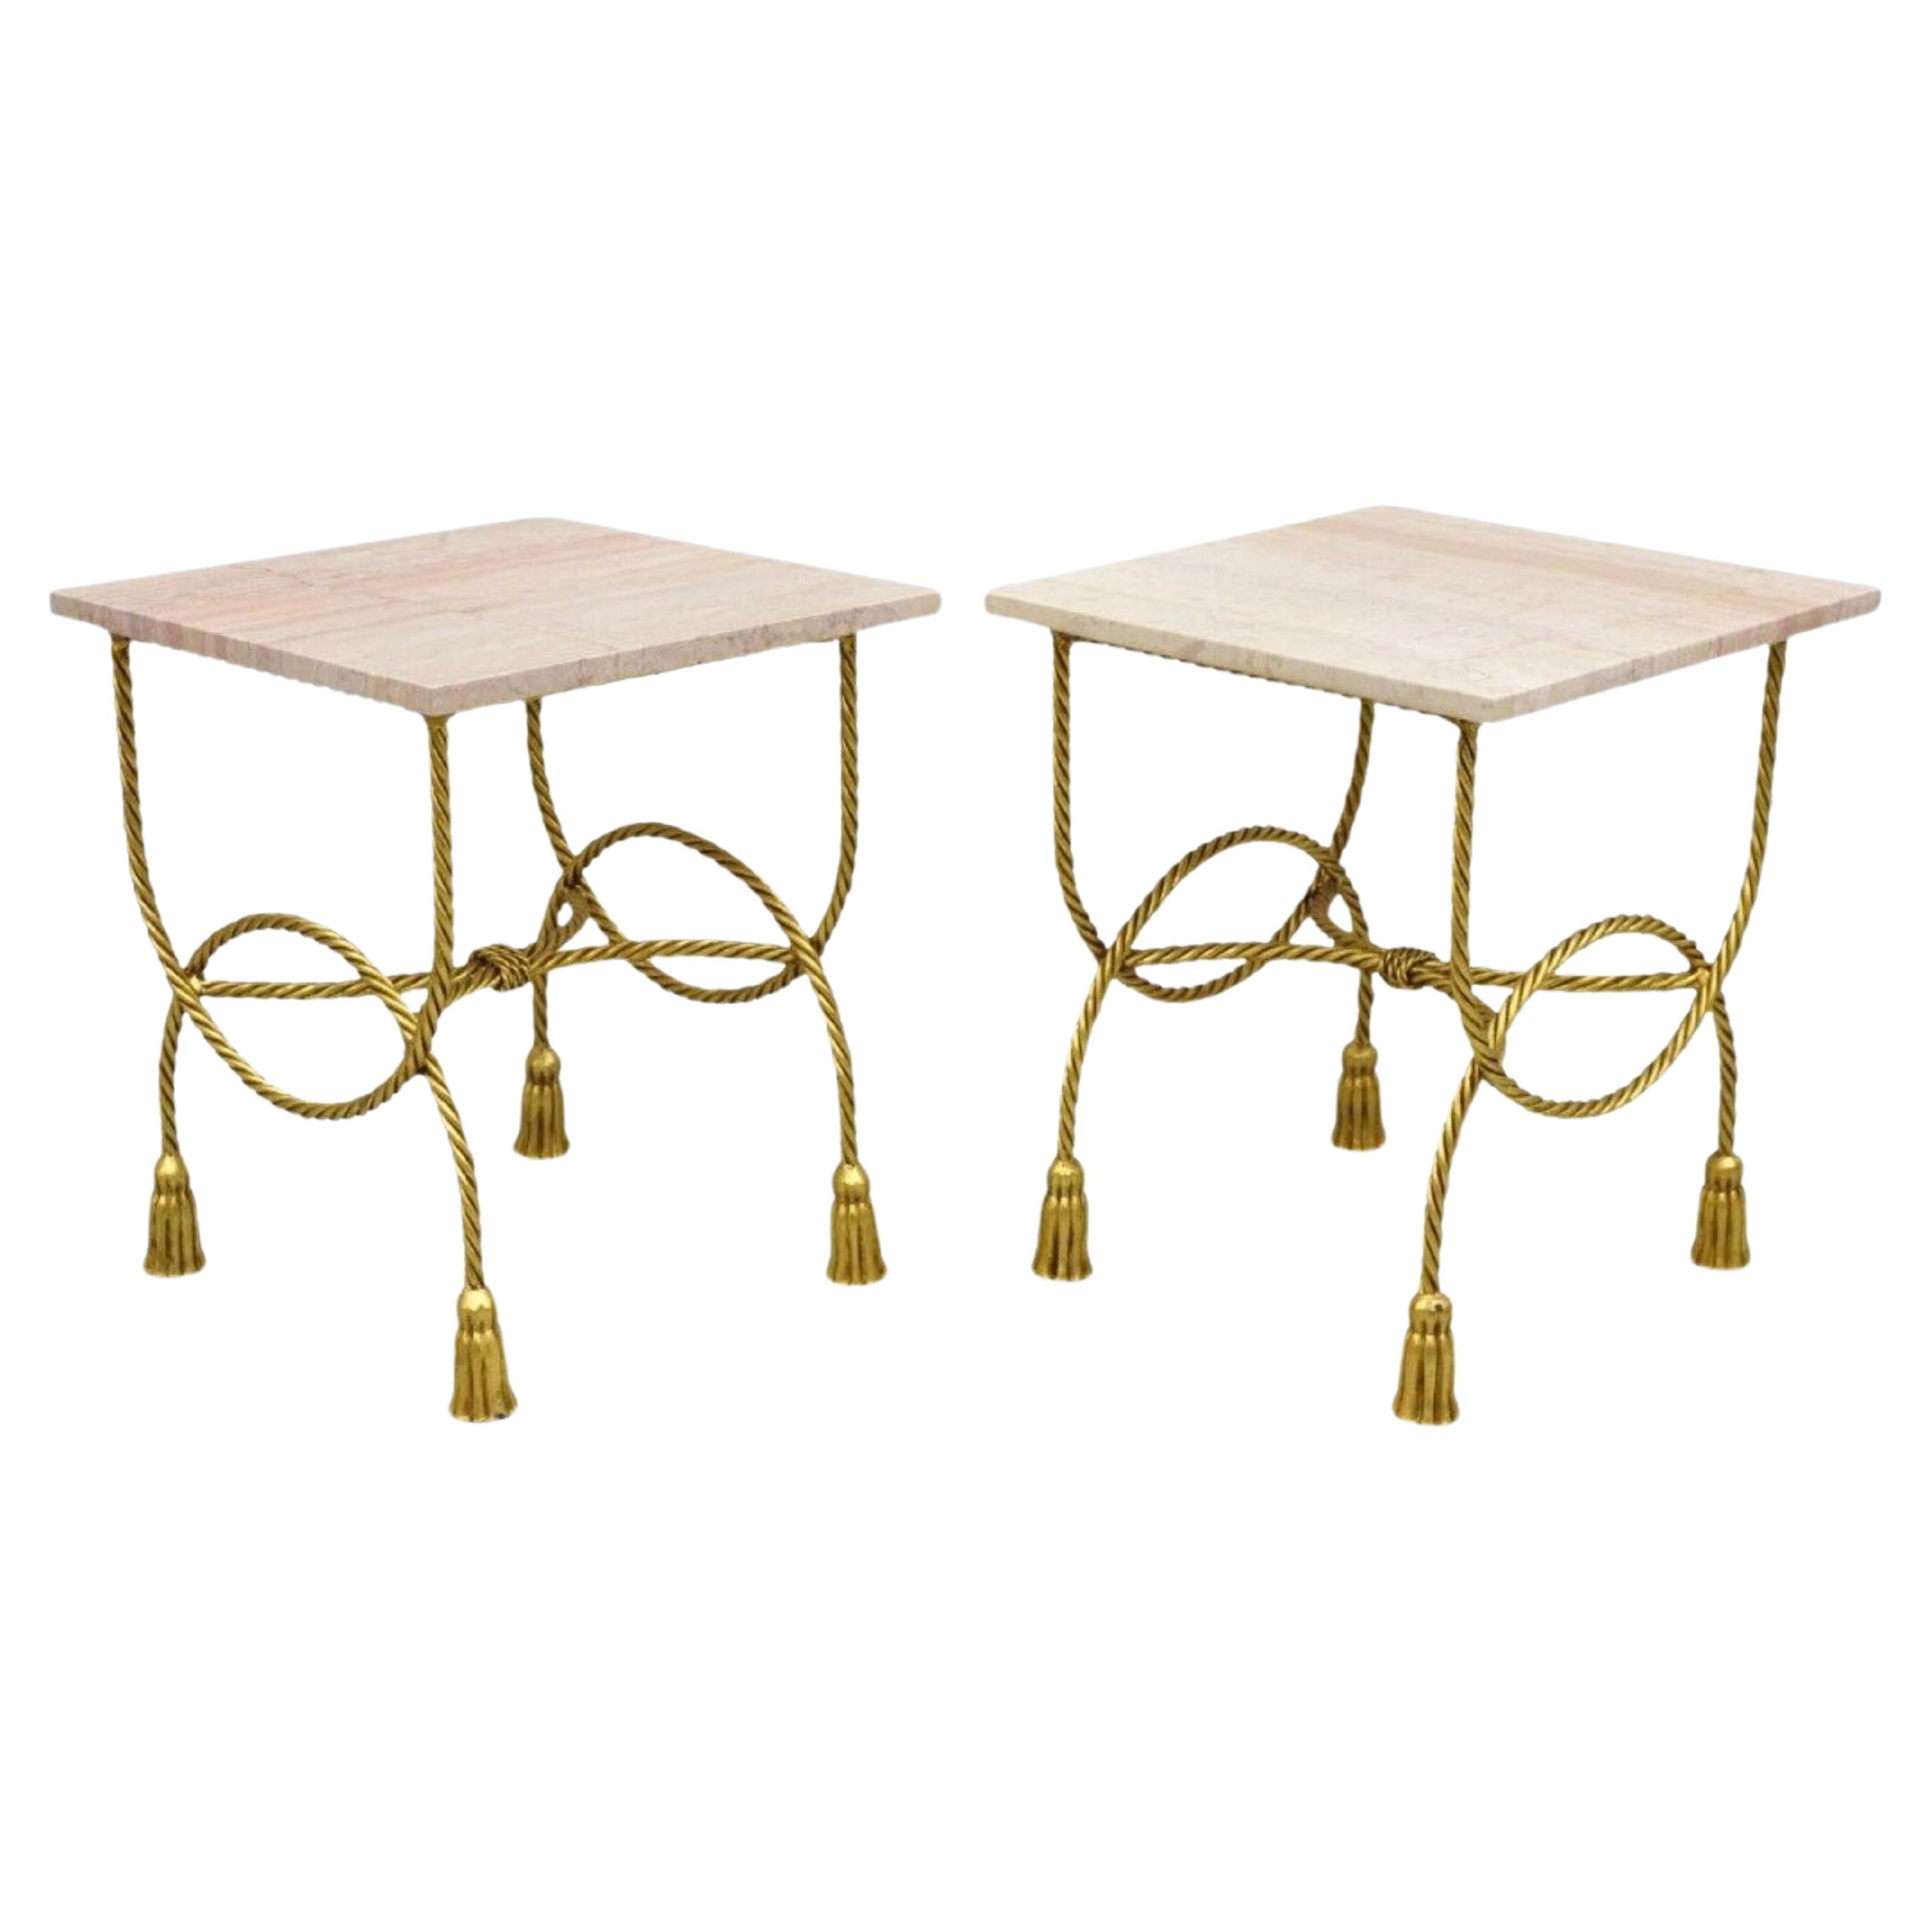 Italian Hollywood Regency Gold Iron Rope Tassel Pink Marble Top Side Table Pair For Sale